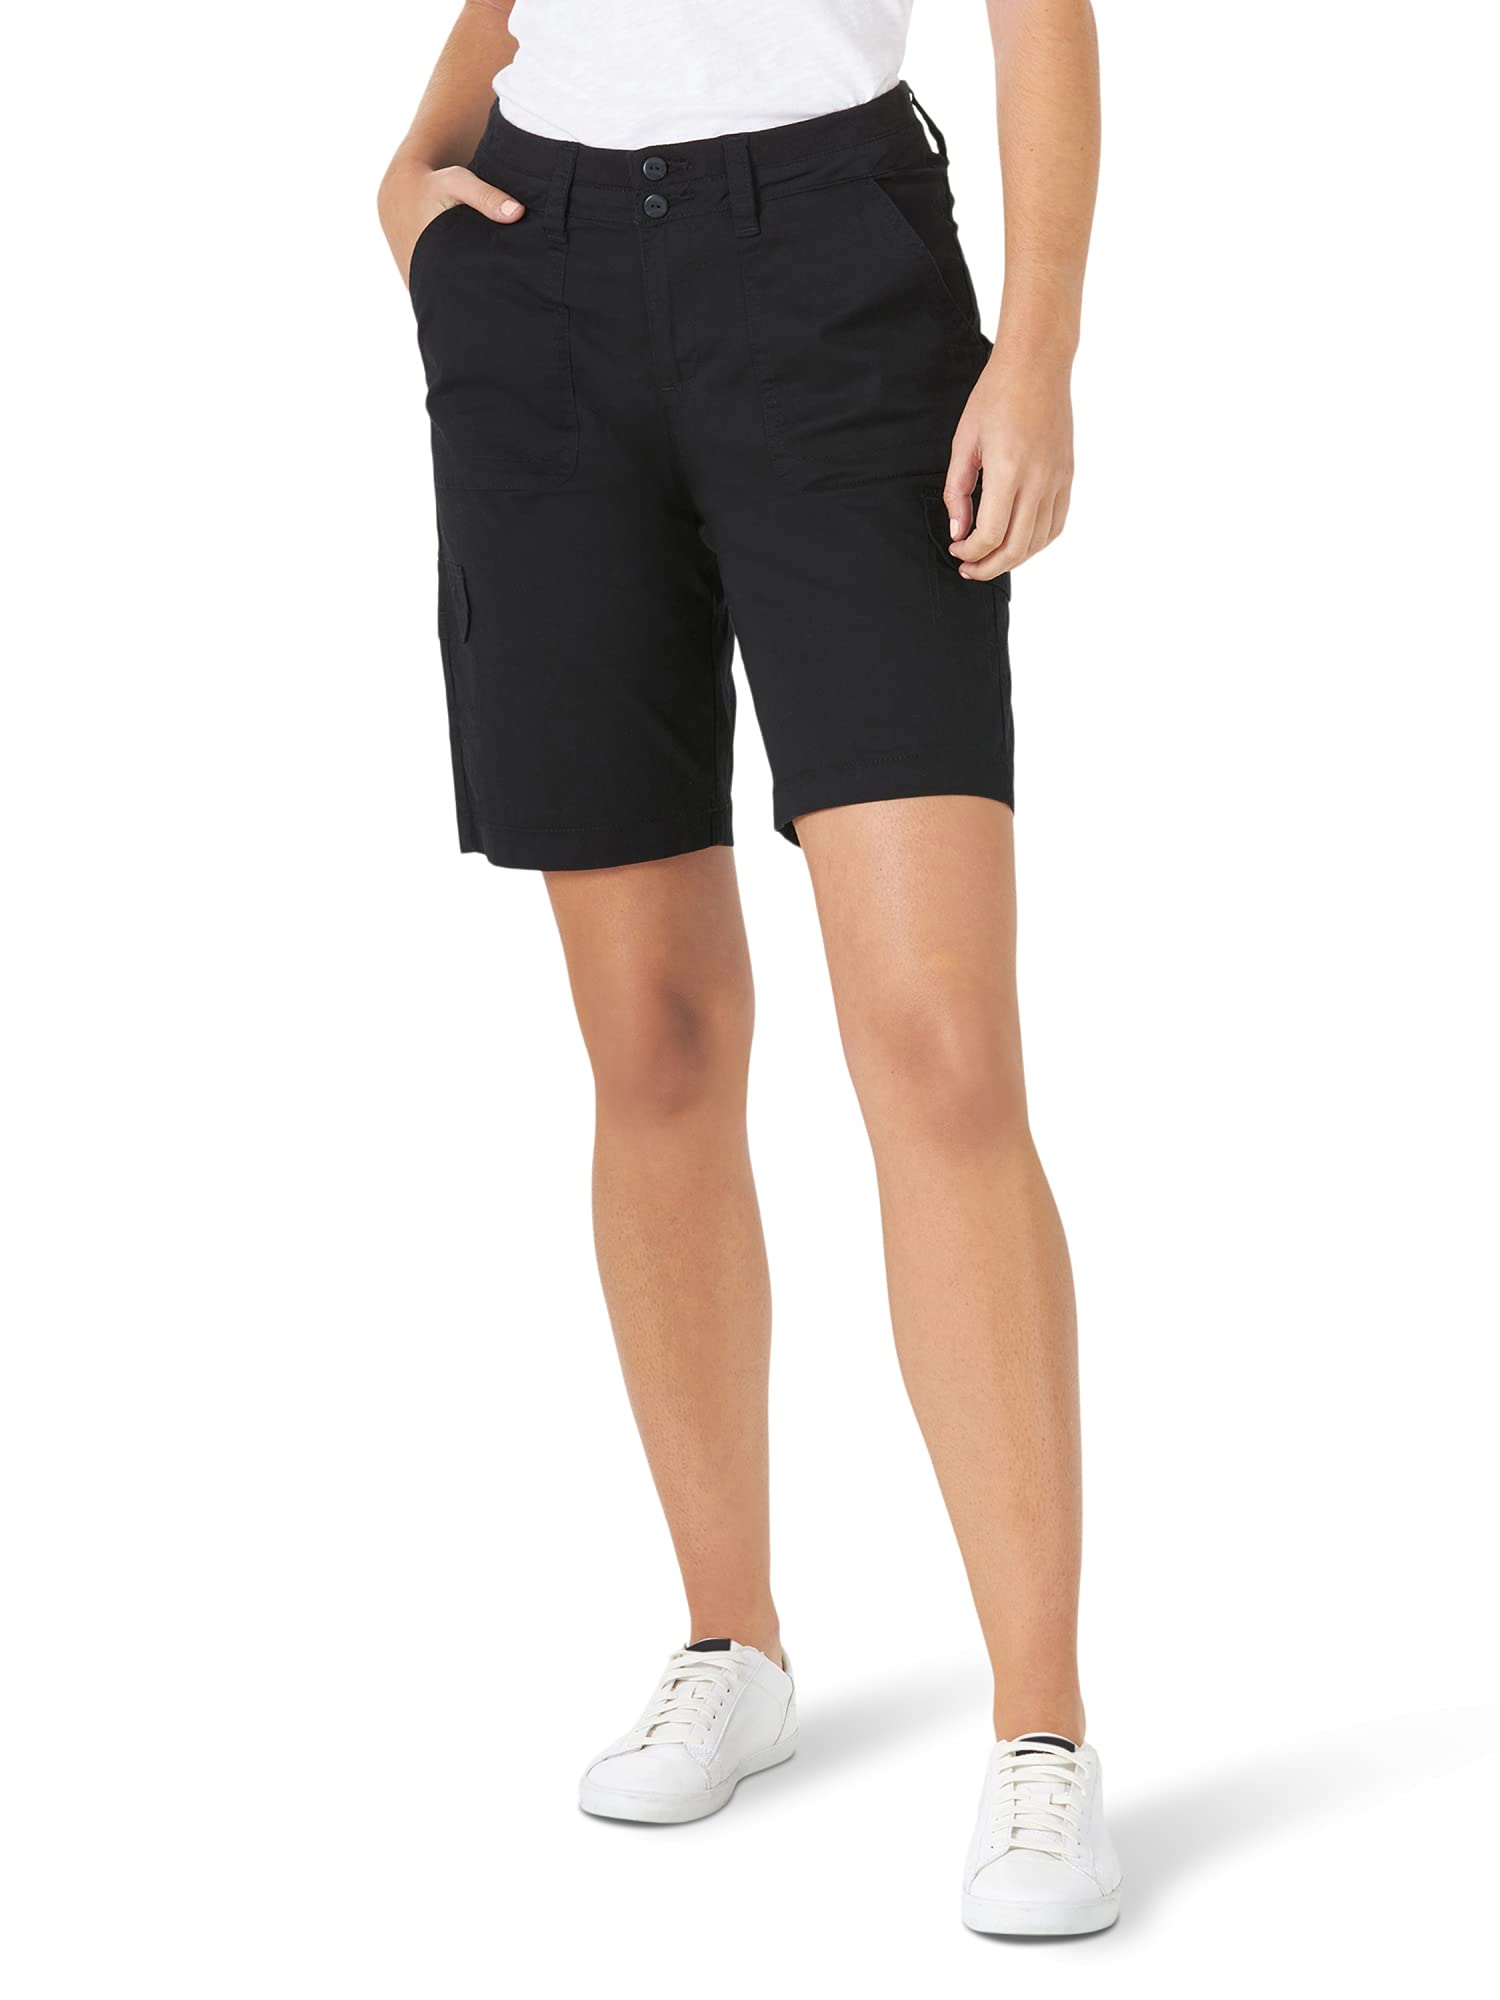 Lee Women's Relaxed Fit Avey Knit Waist Cargo Bermuda Short (Black or Cornflower) $13.80 + Free Shipping w/ Prime or on $35+